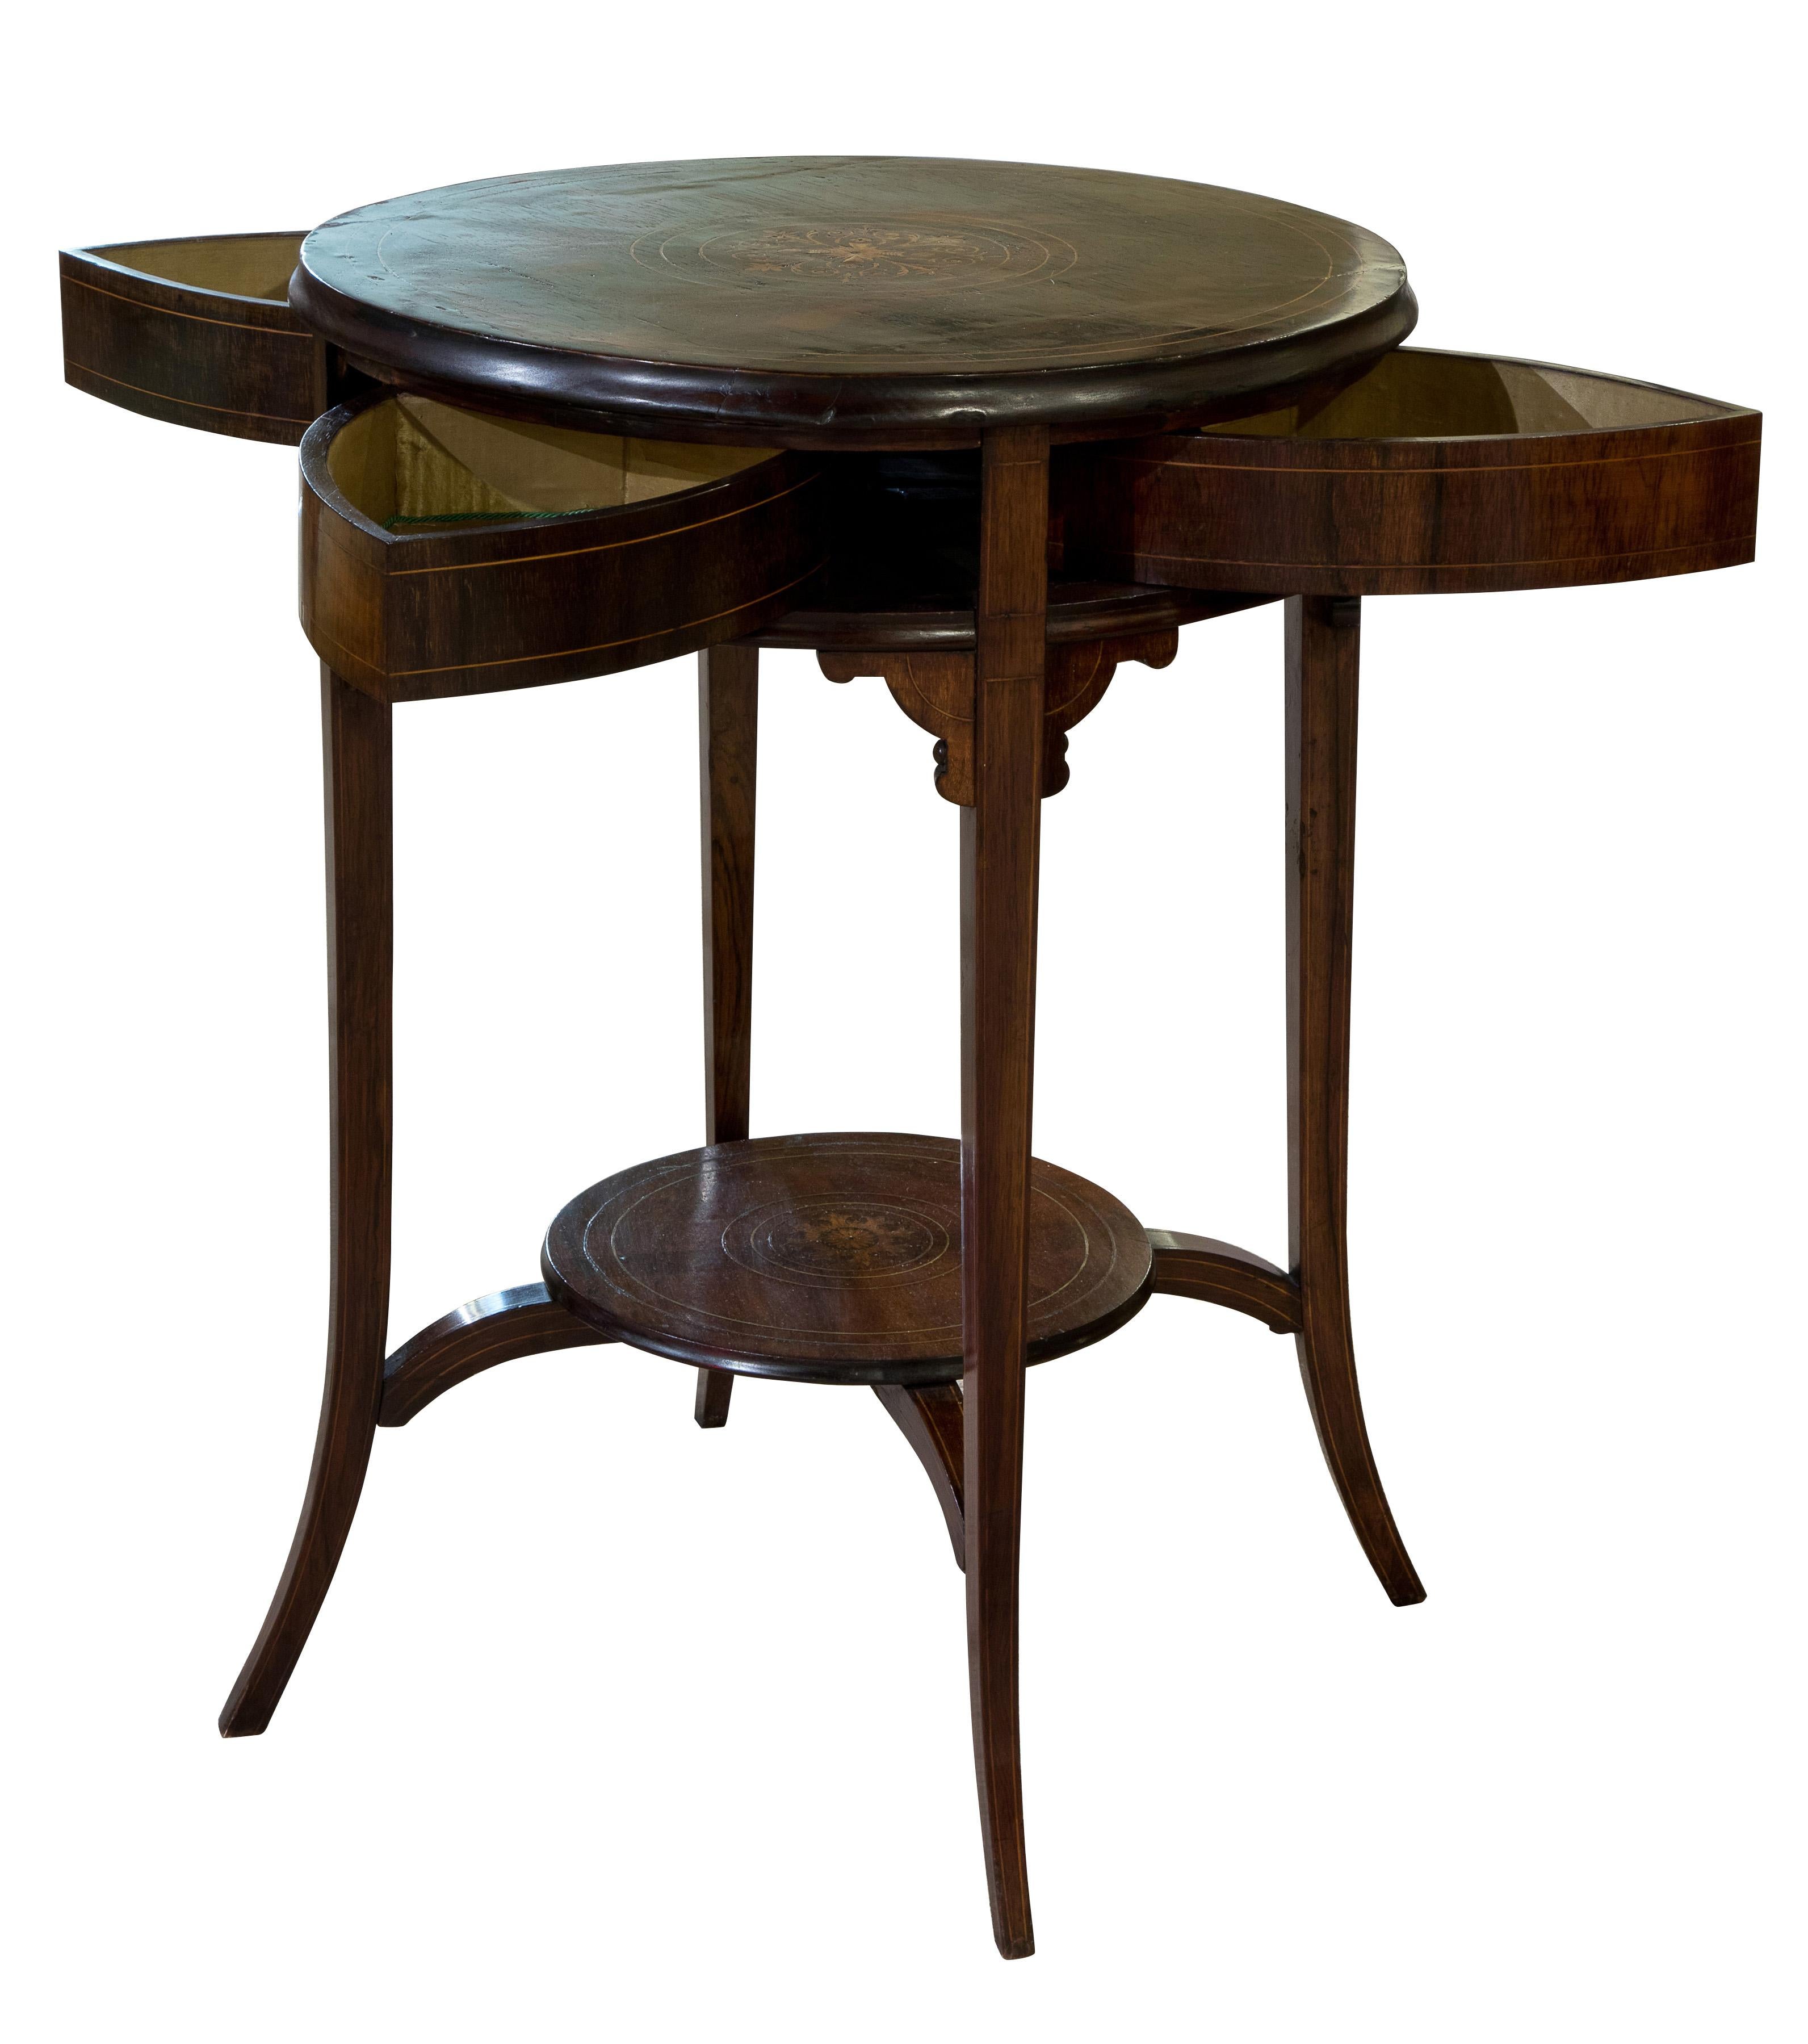 Circular inlaid drum table with rotating top to reveal four drawers.

Highly unusual Victorian piece.